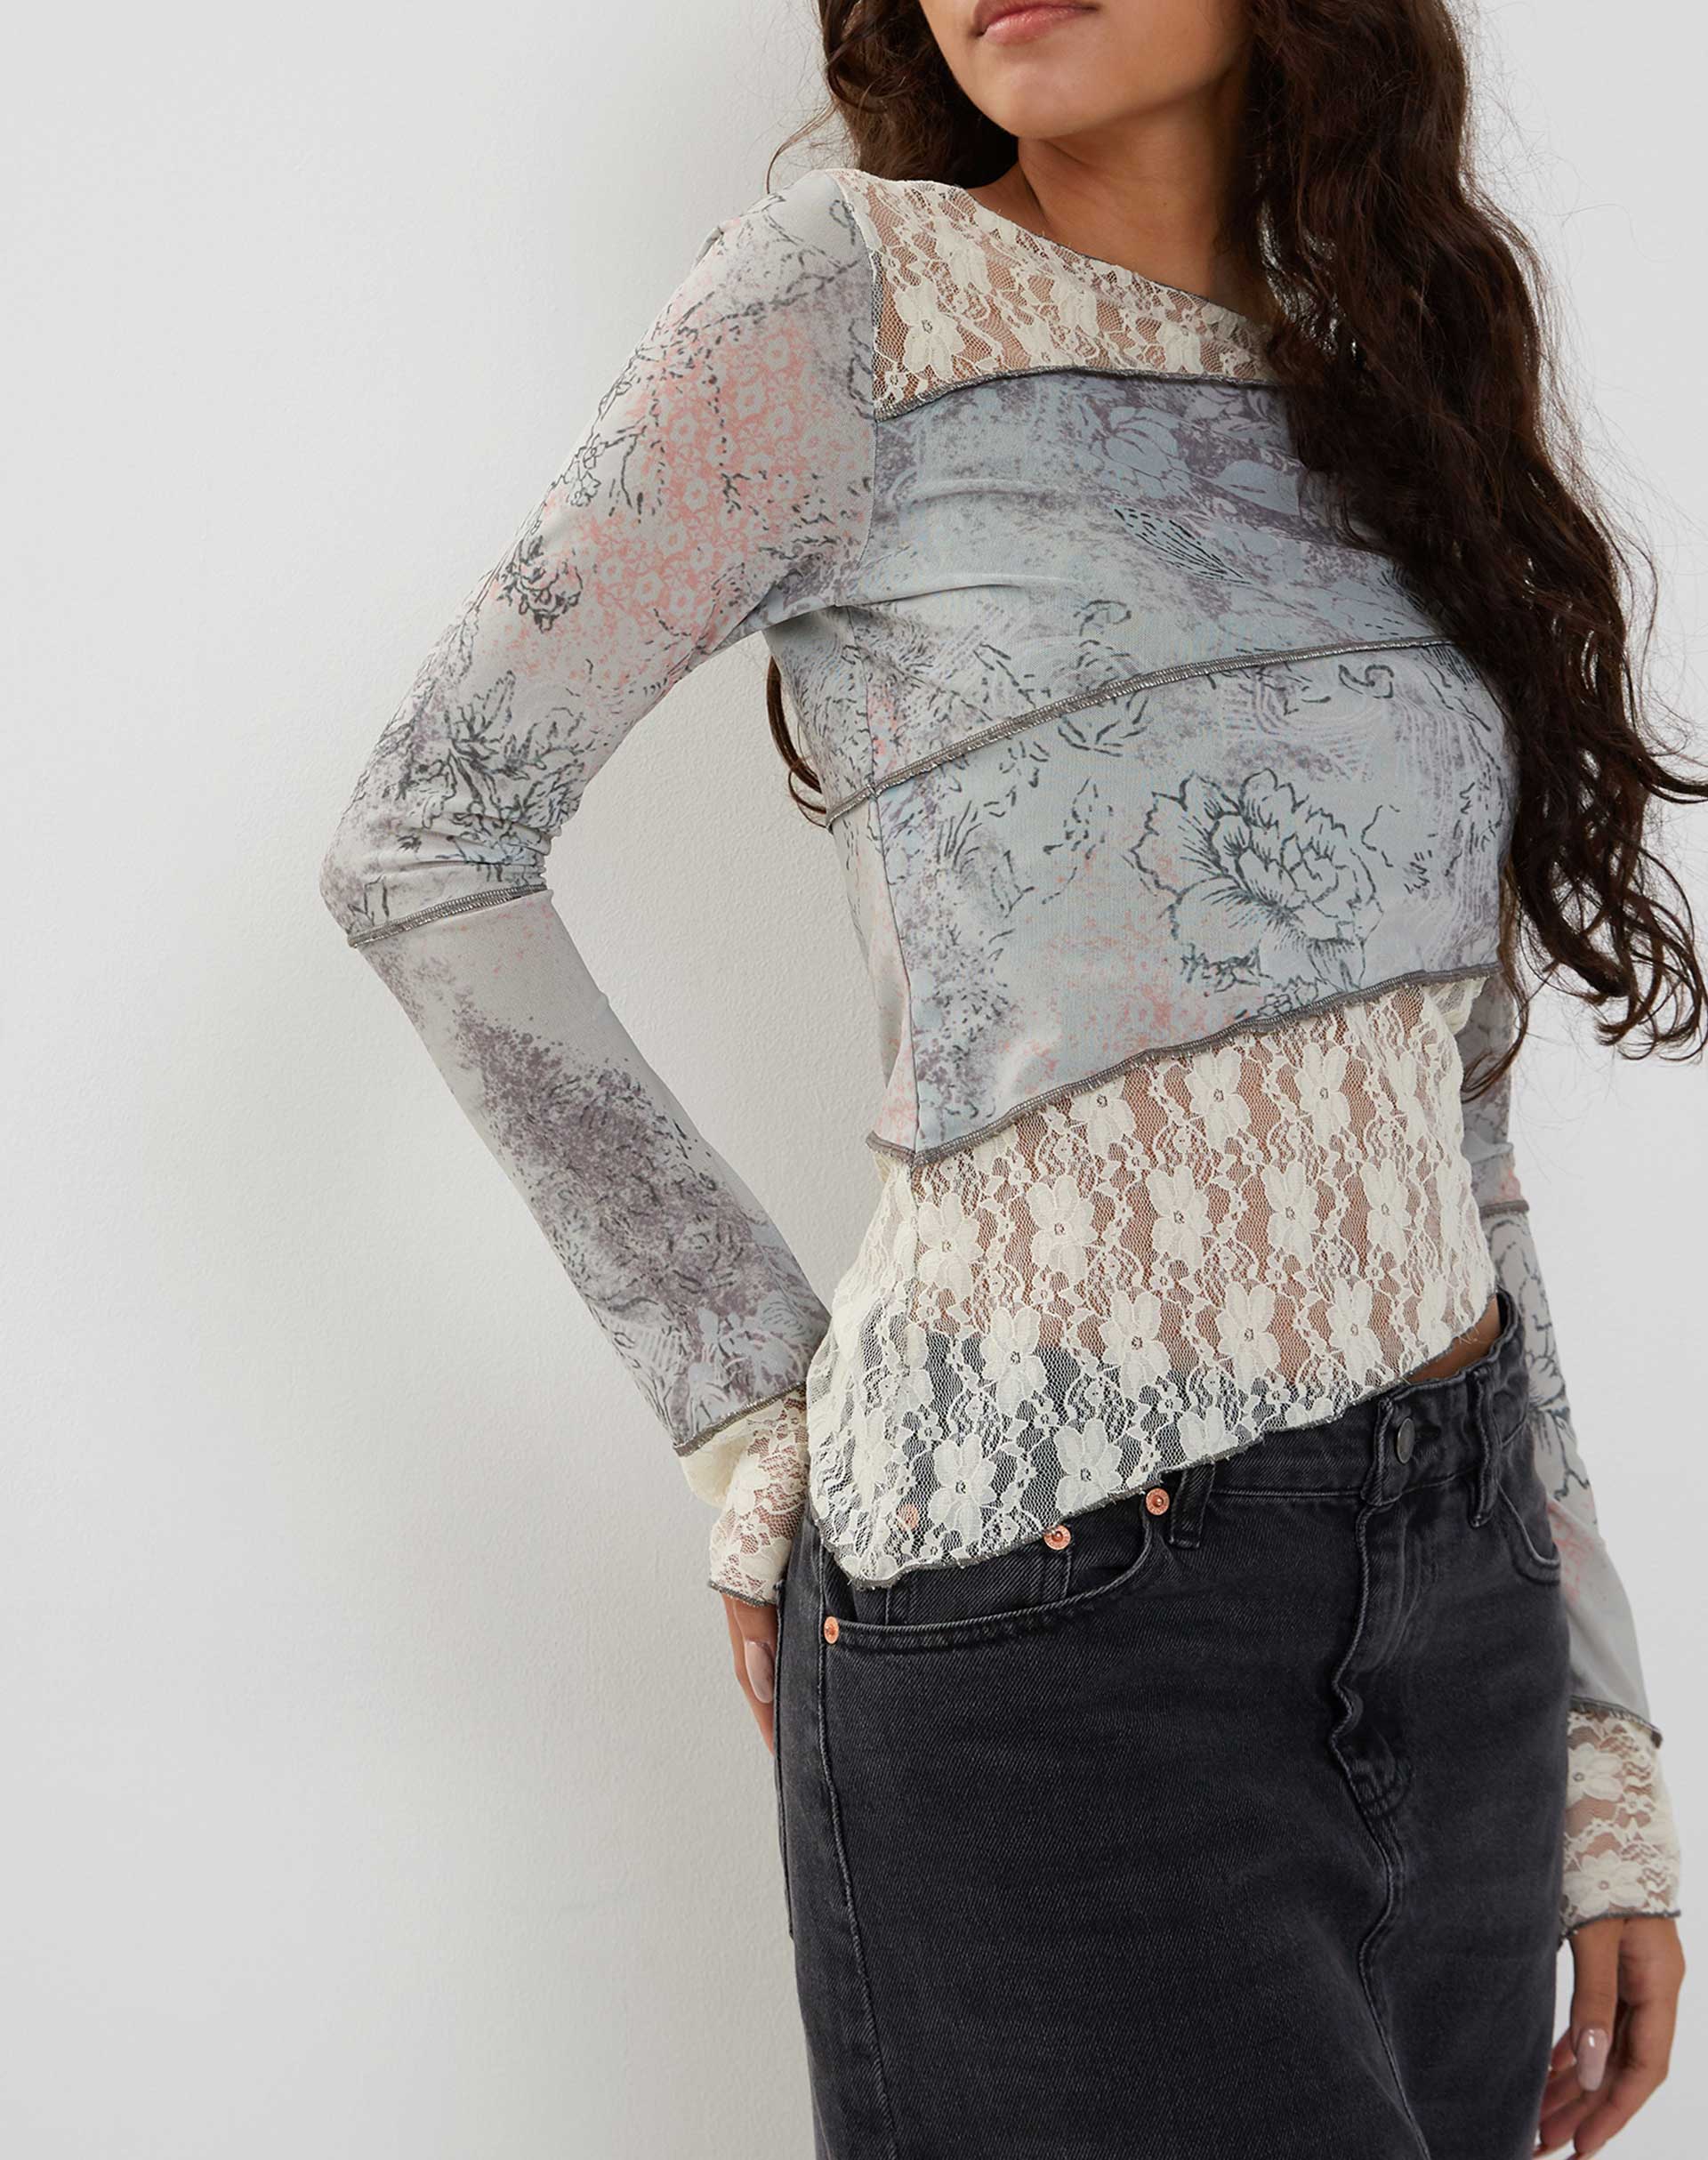 Image of Lucca Long Sleeve Top in Lace Pastel Floral